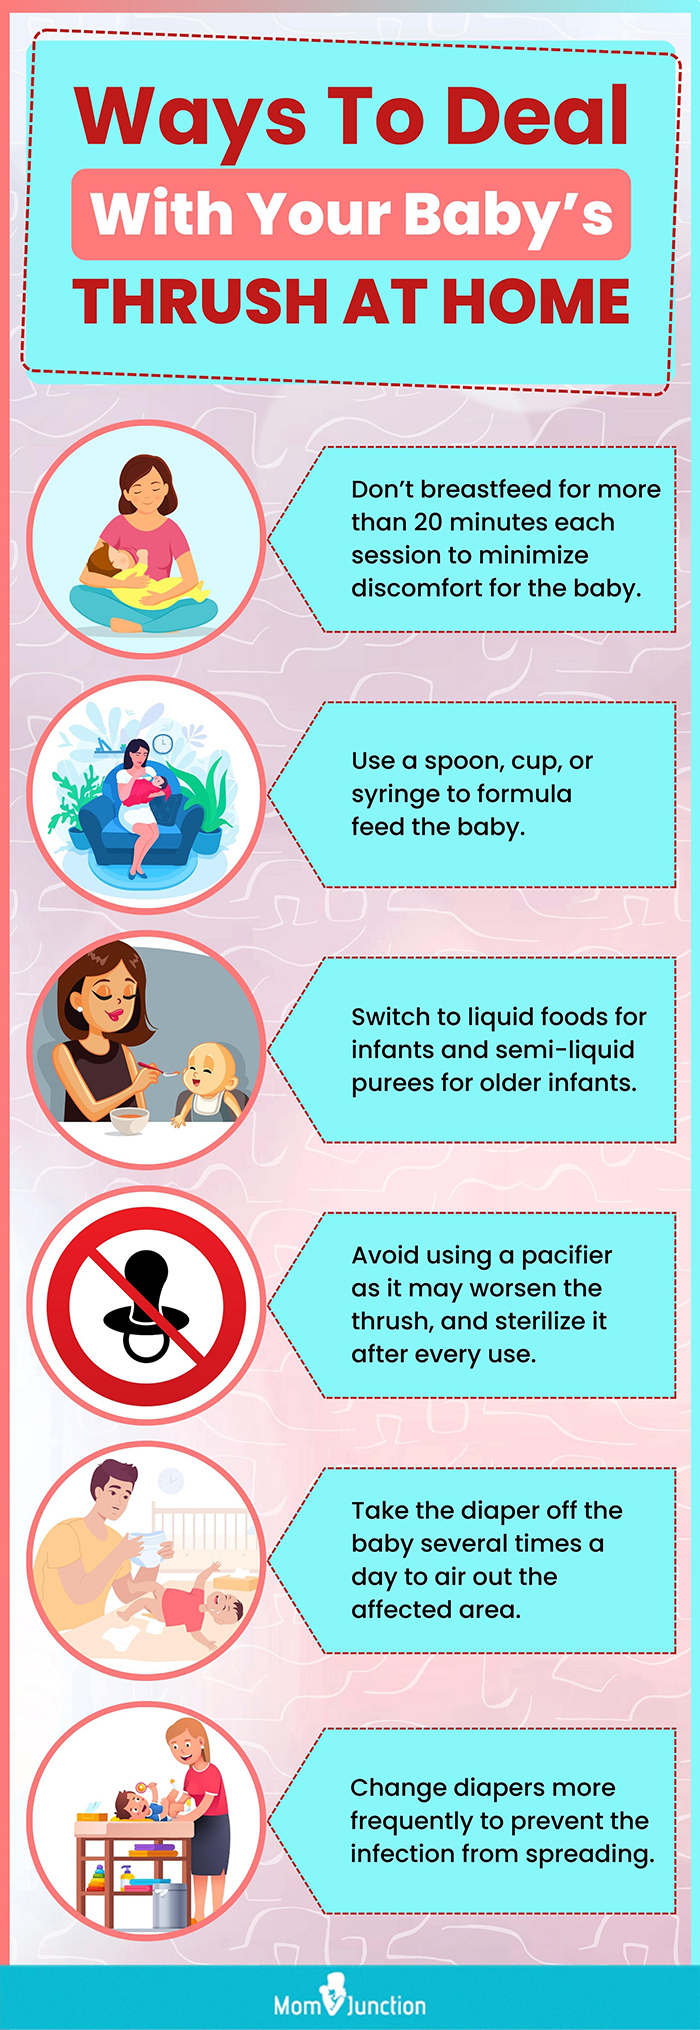 ways to deal with your baby’s thrush at home (infographic)